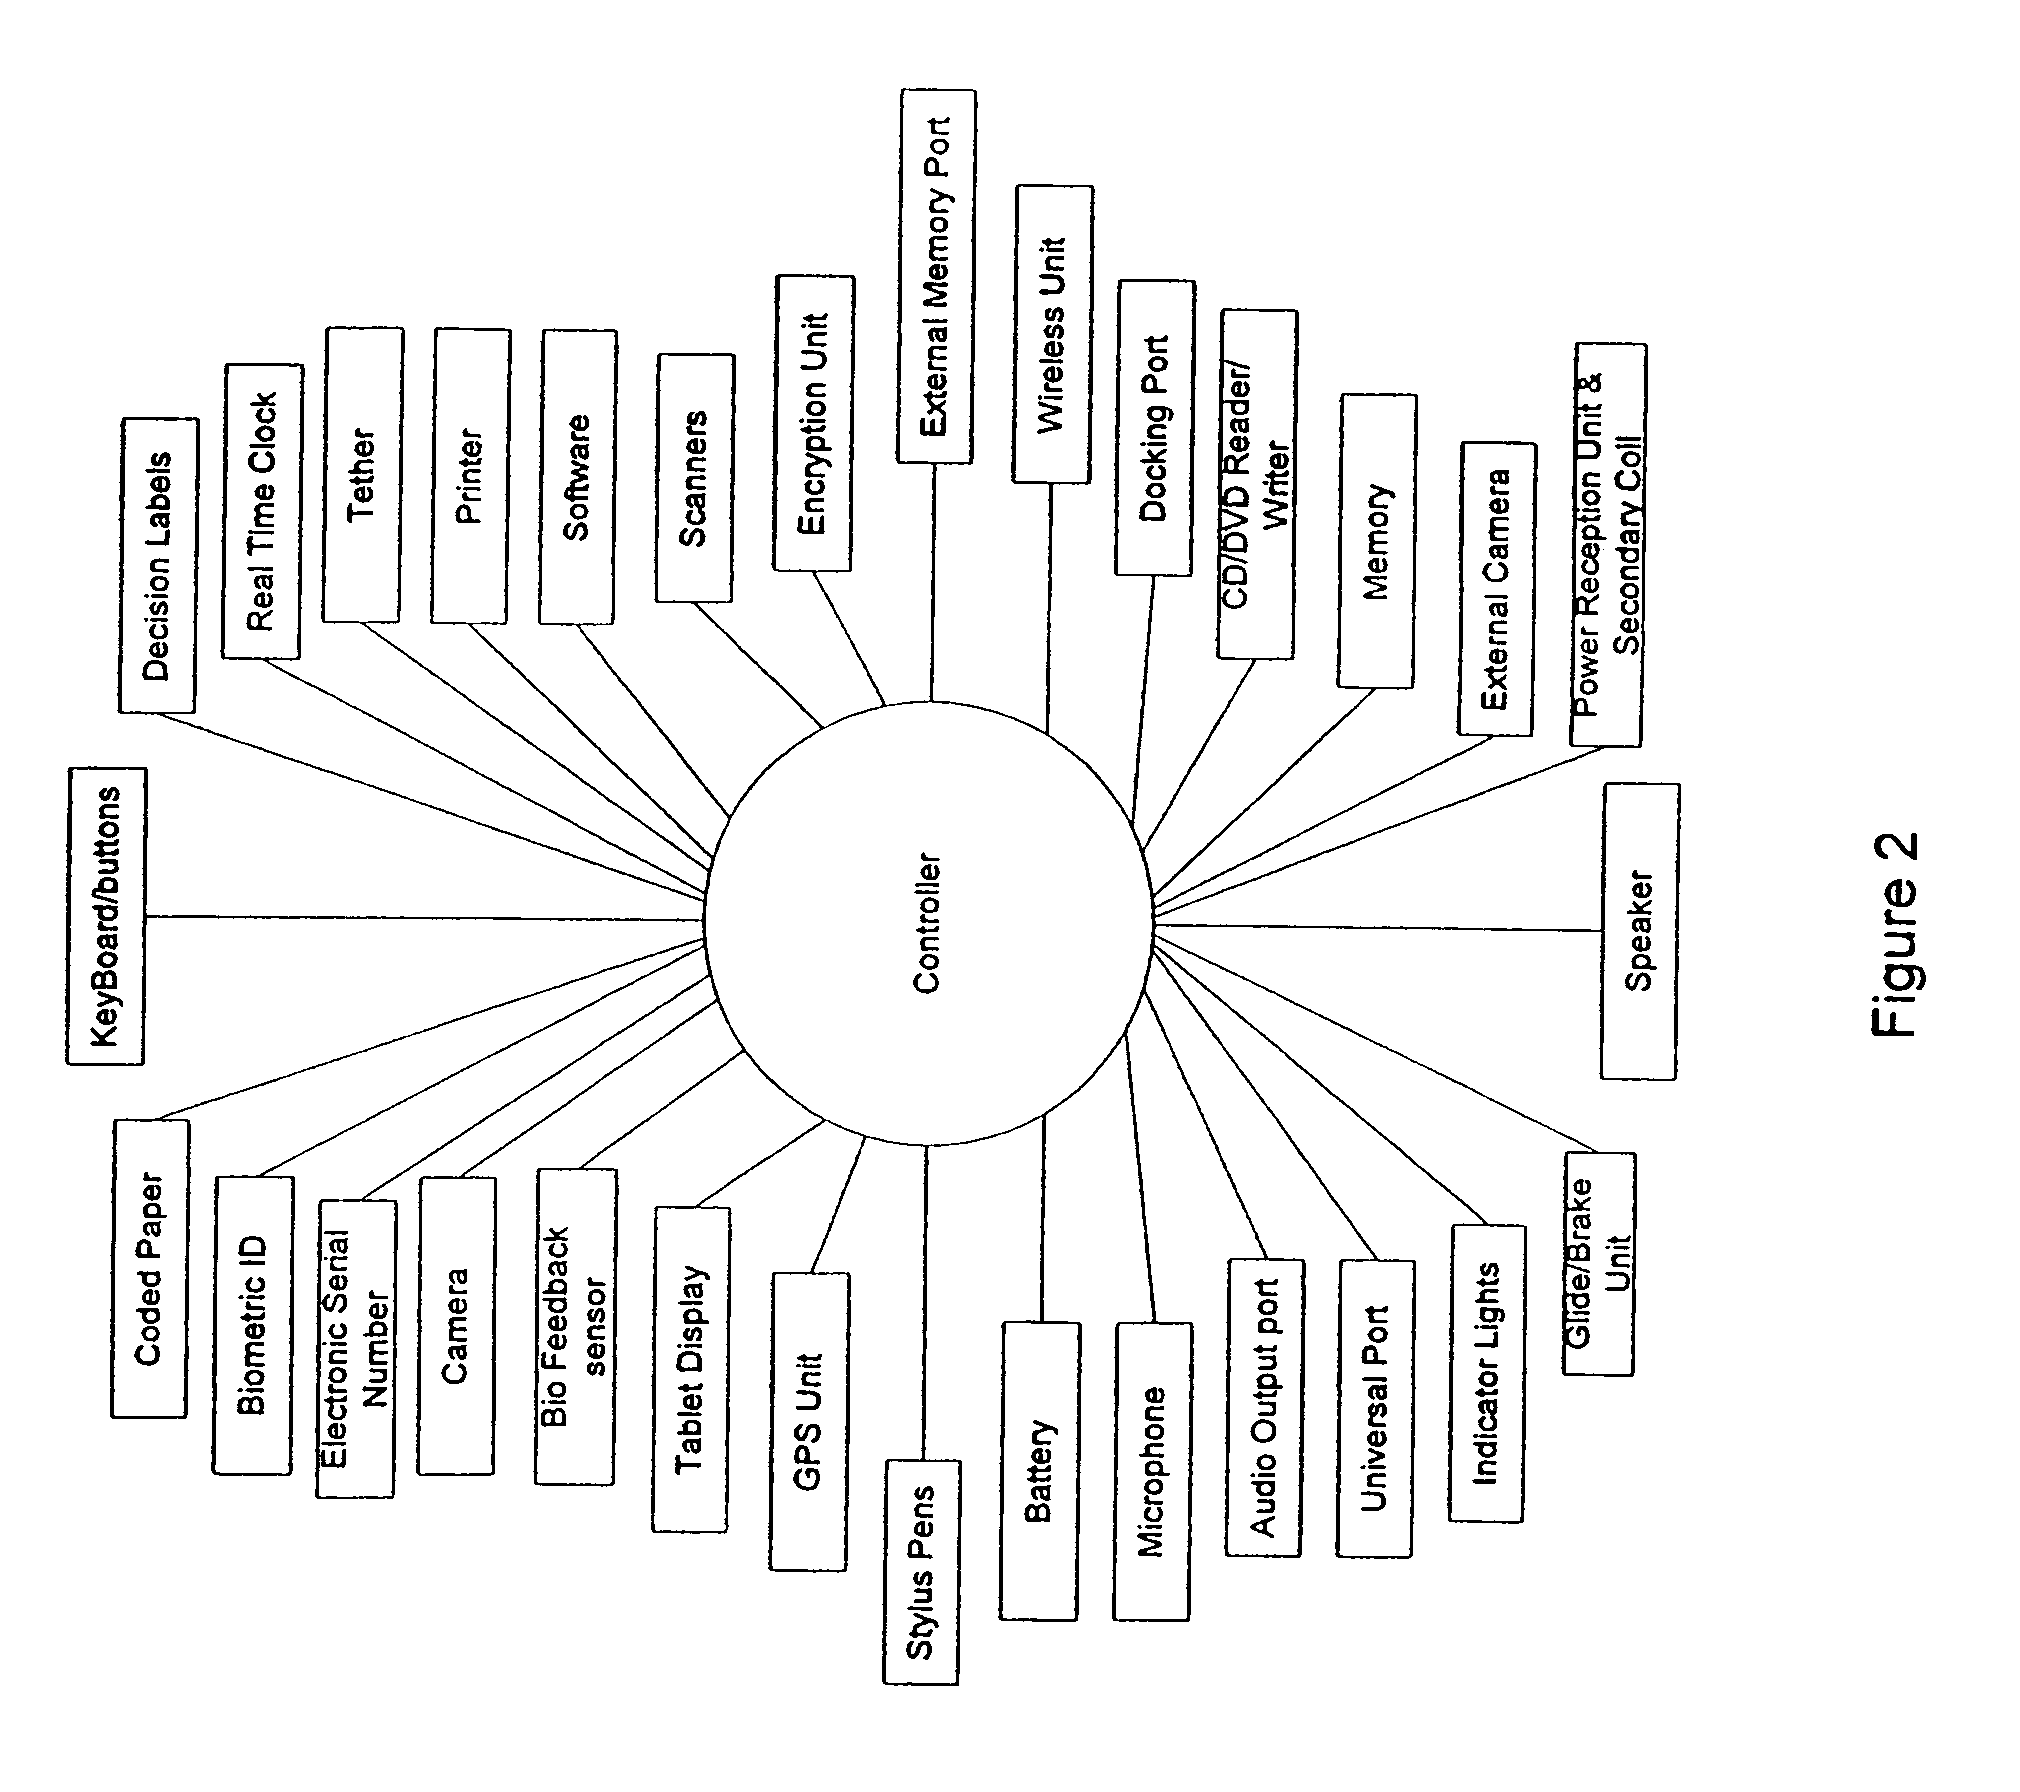 Transaction automation and archival system using electronic contract and disclosure units